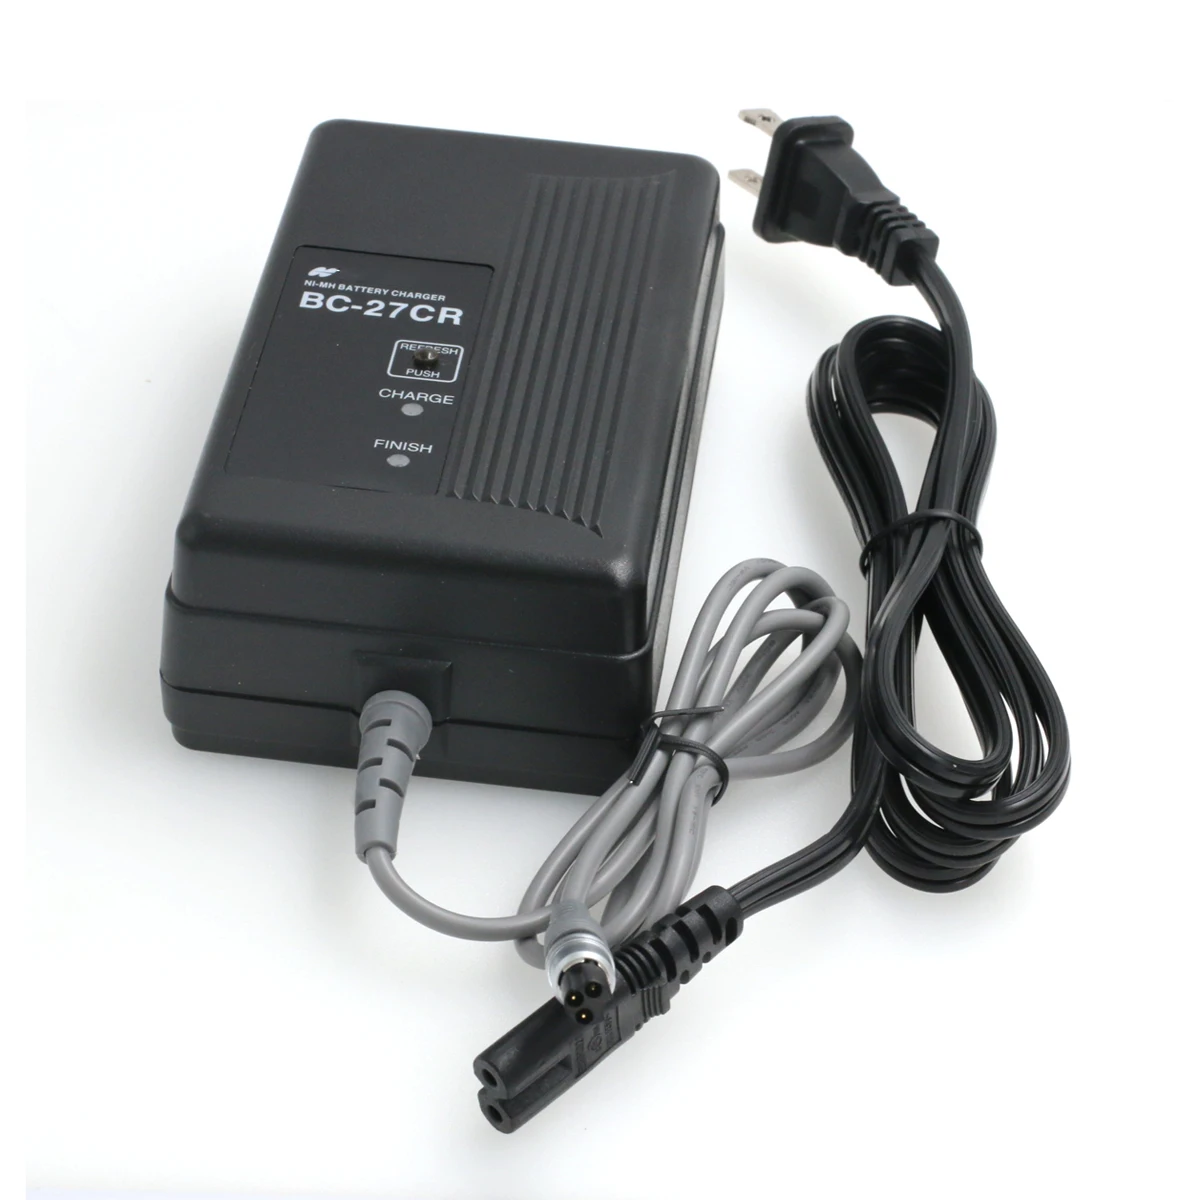 NEW TOPCON BC-27CR 3PIN Charger for TOPCON Battery BT-52Q BT-52QA total station 